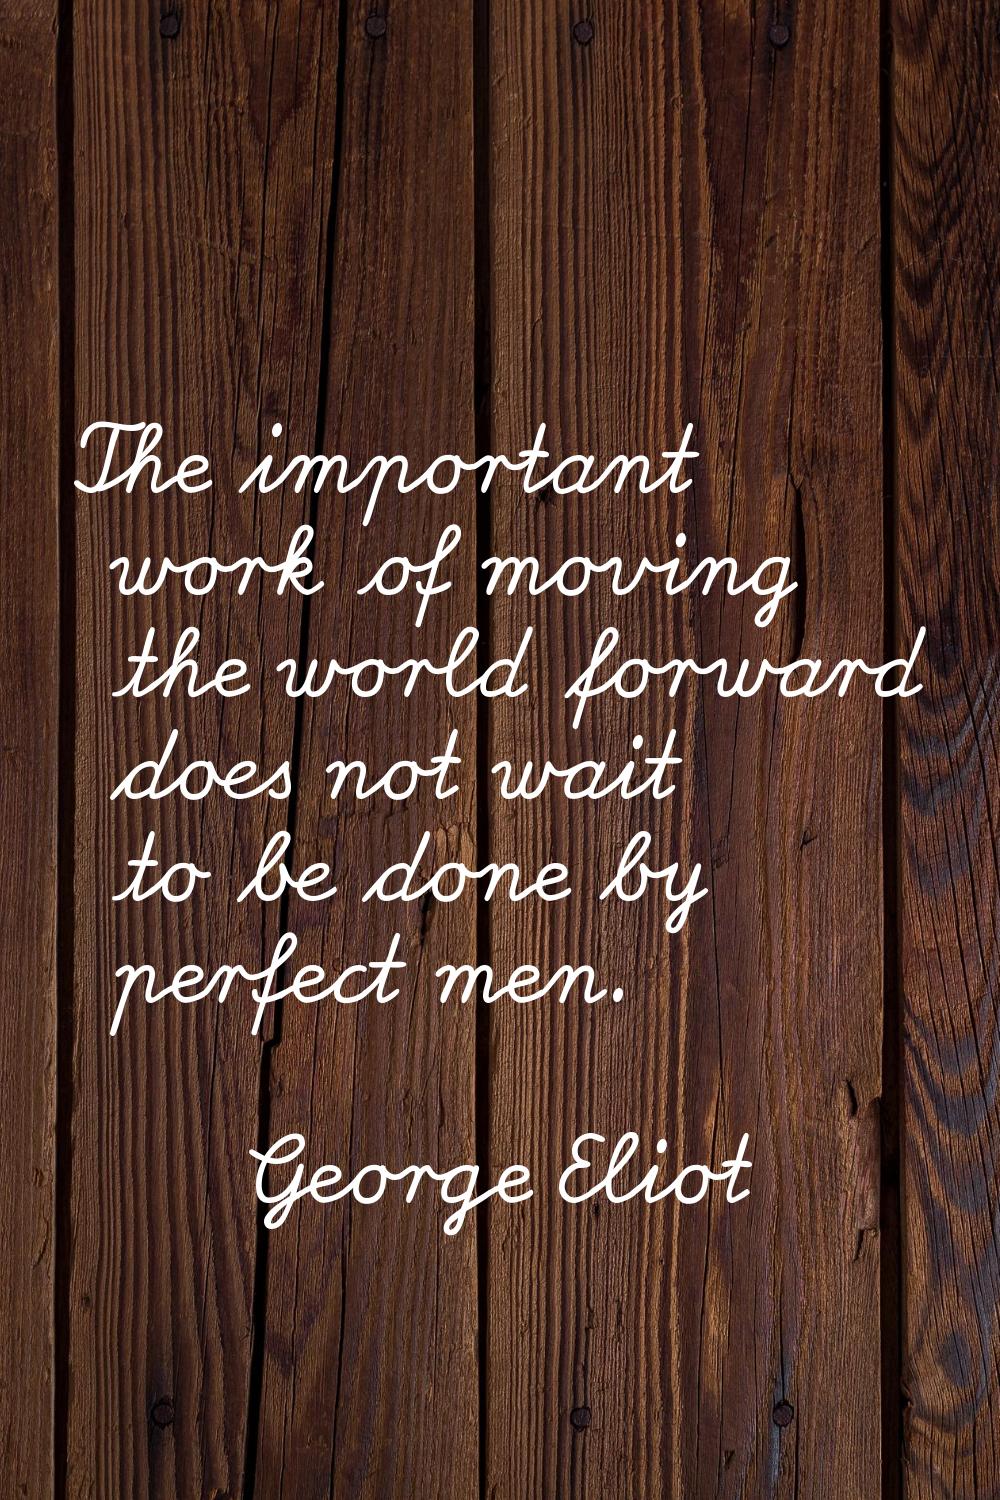 The important work of moving the world forward does not wait to be done by perfect men.